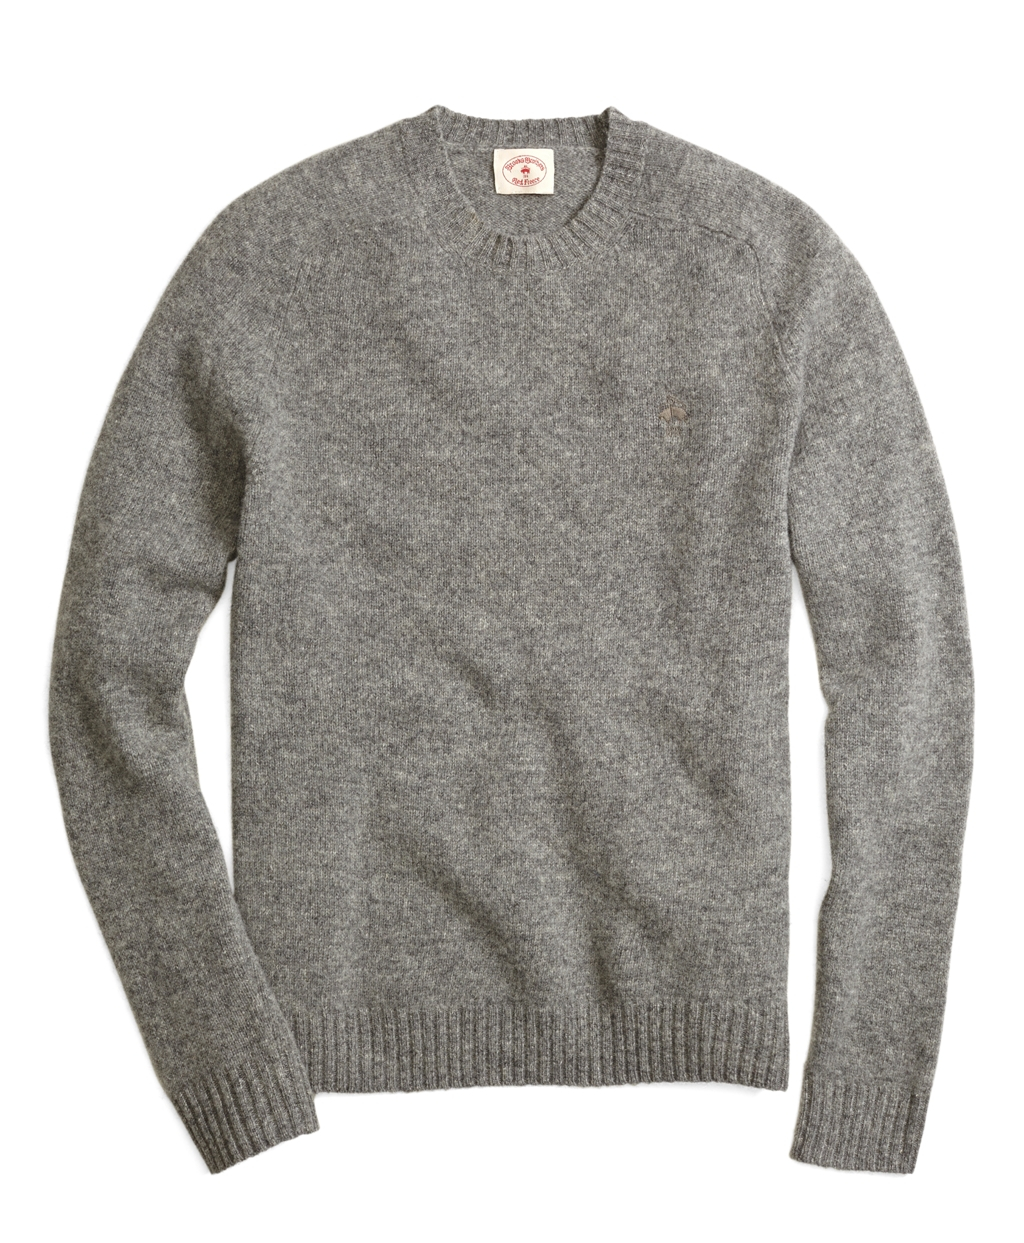 Lyst - Brooks Brothers Shetland Crewneck Sweater in Gray for Men